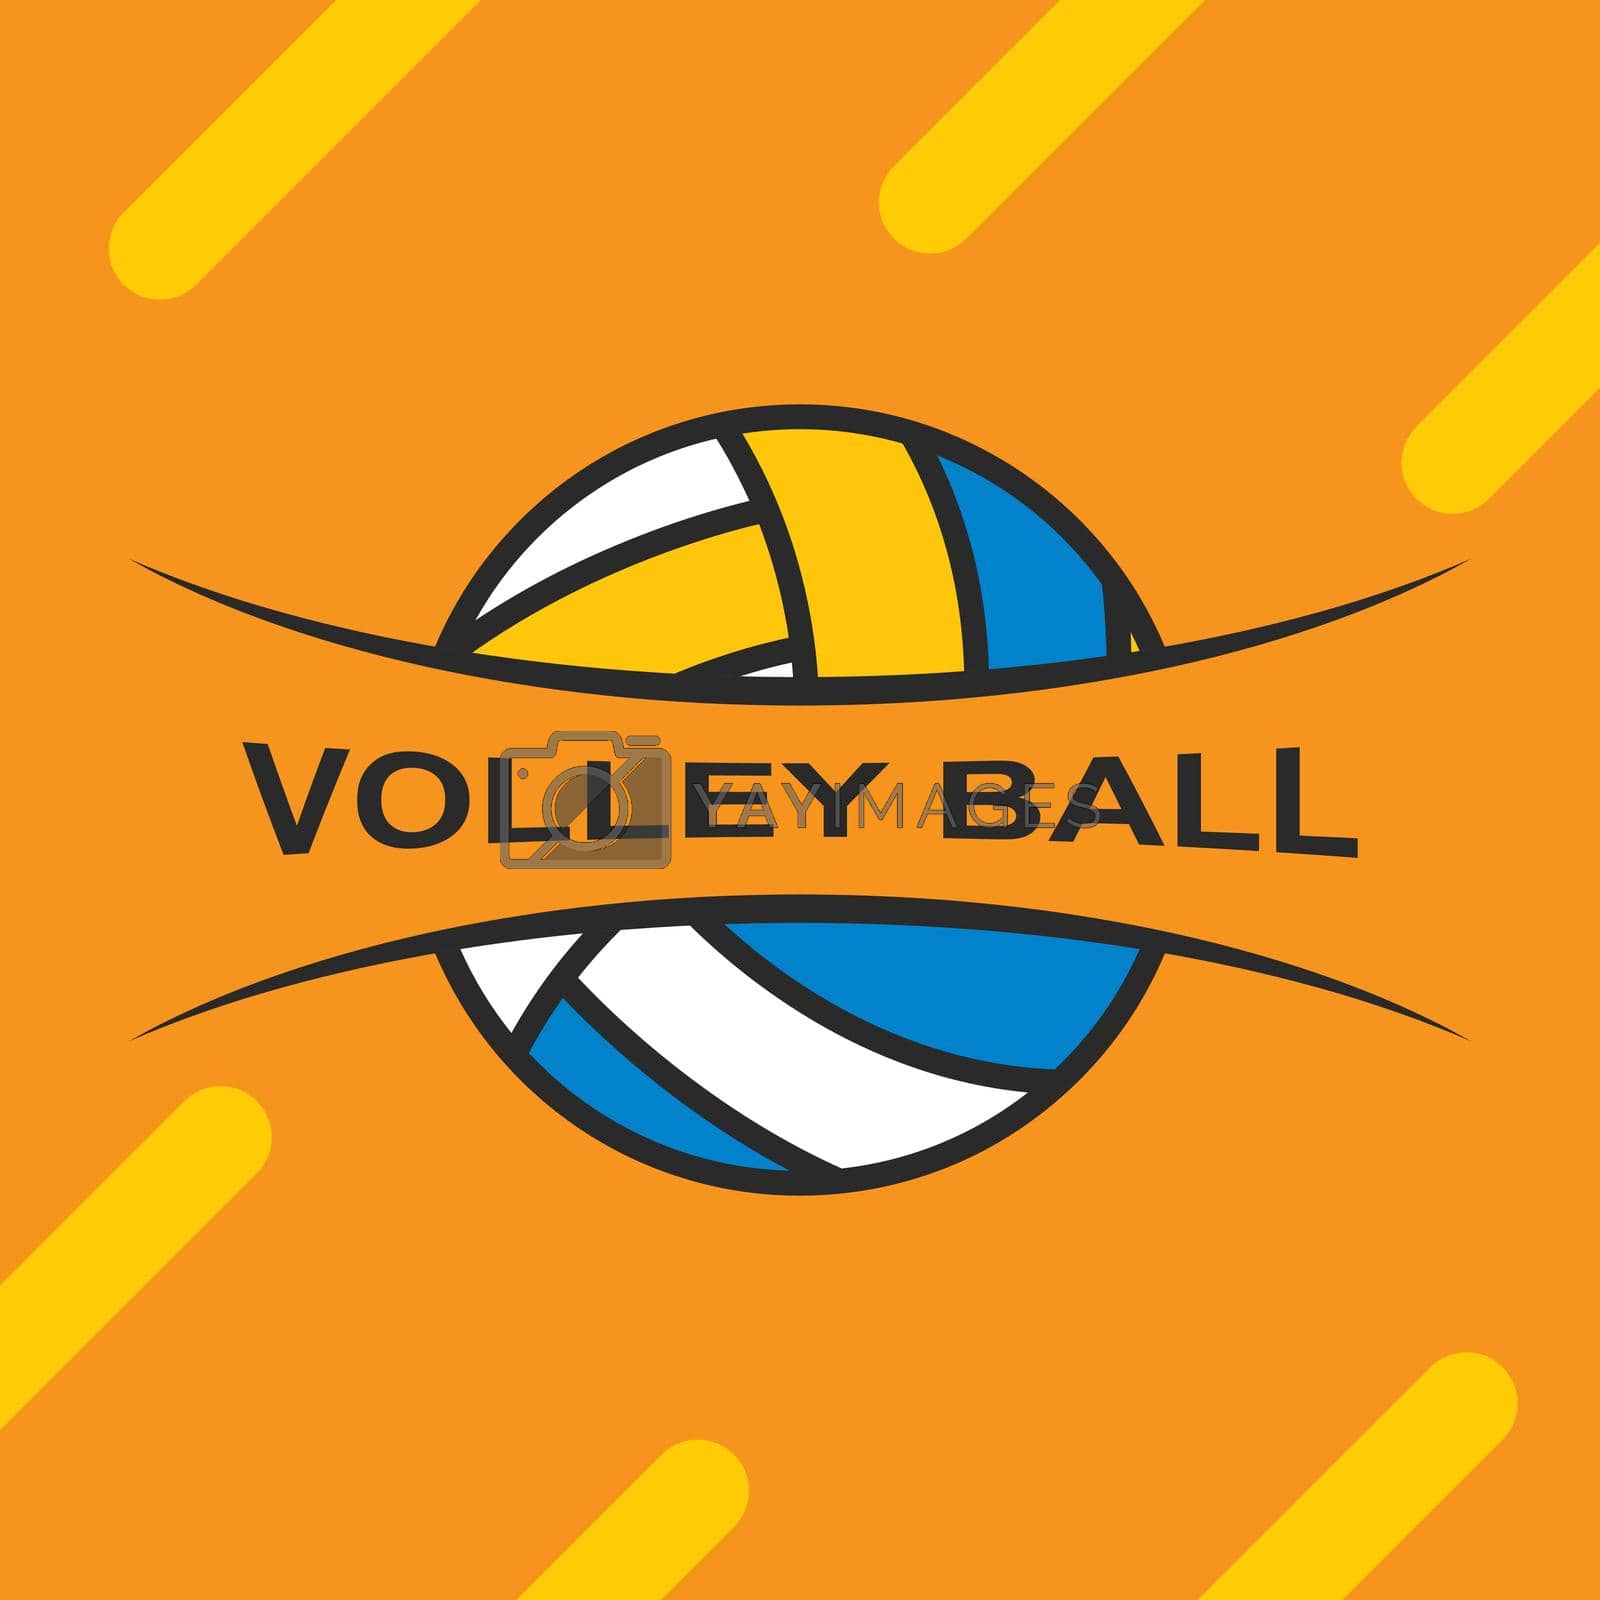 Royalty free image of Volley ball logo vector by awk